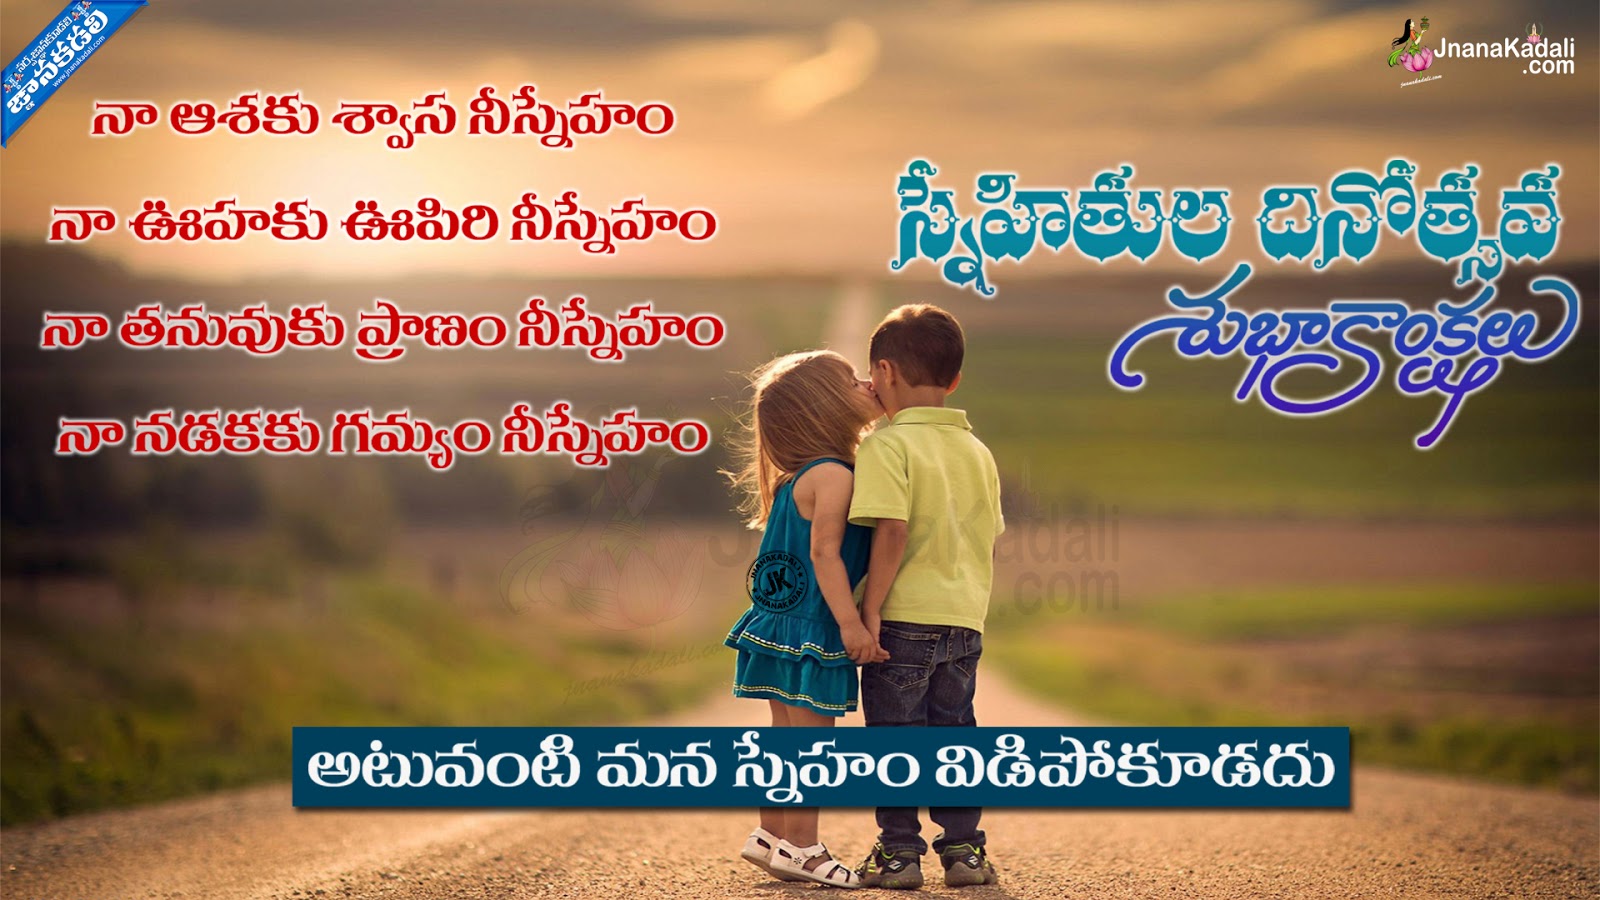 Friendship day telugu quotes with hd wallpapers 